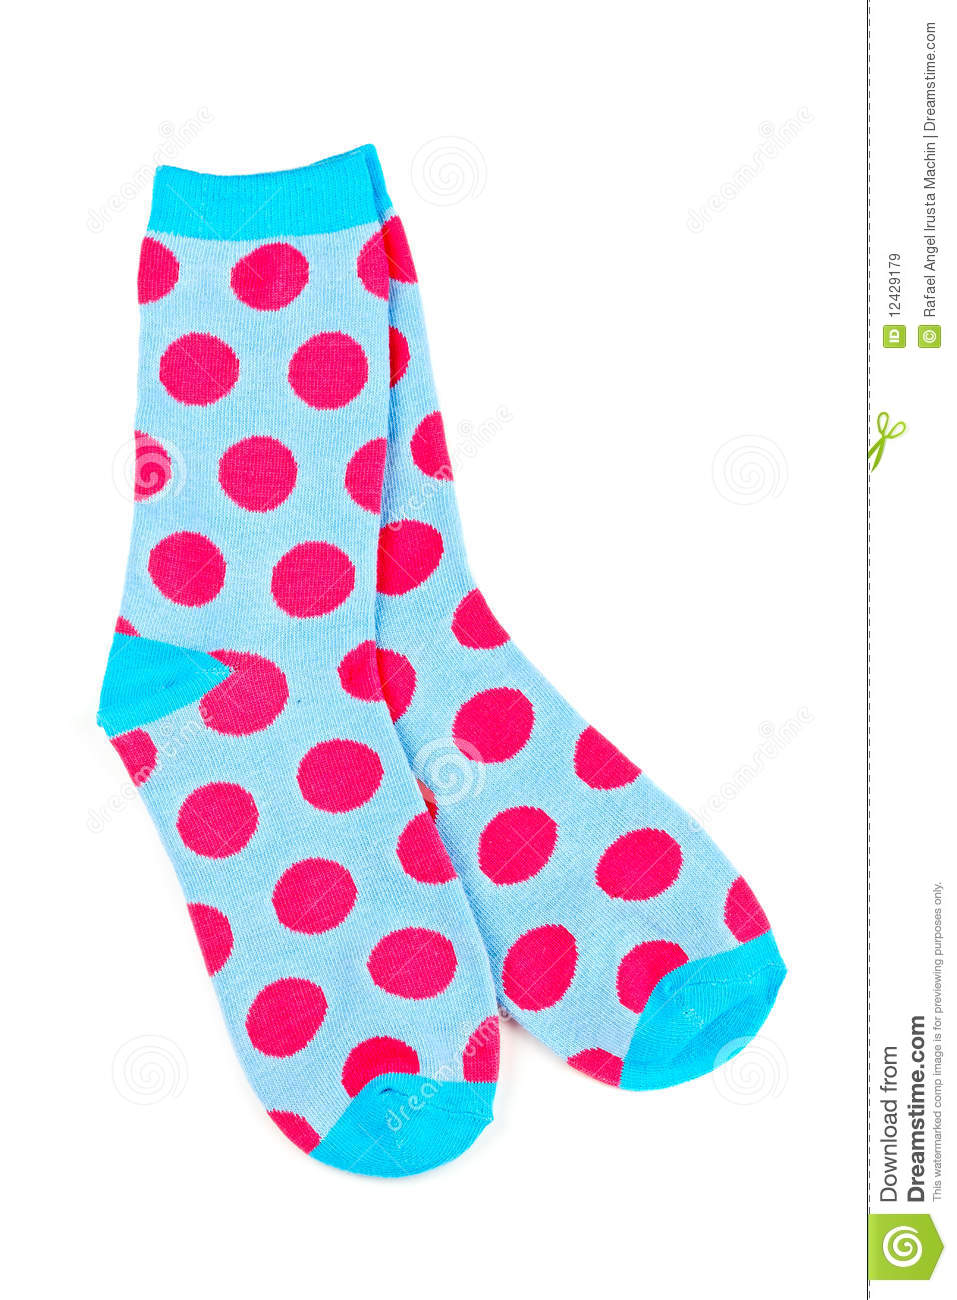 Pair Of Colorful Socks Royalty Free Stock Images   Image  12429179